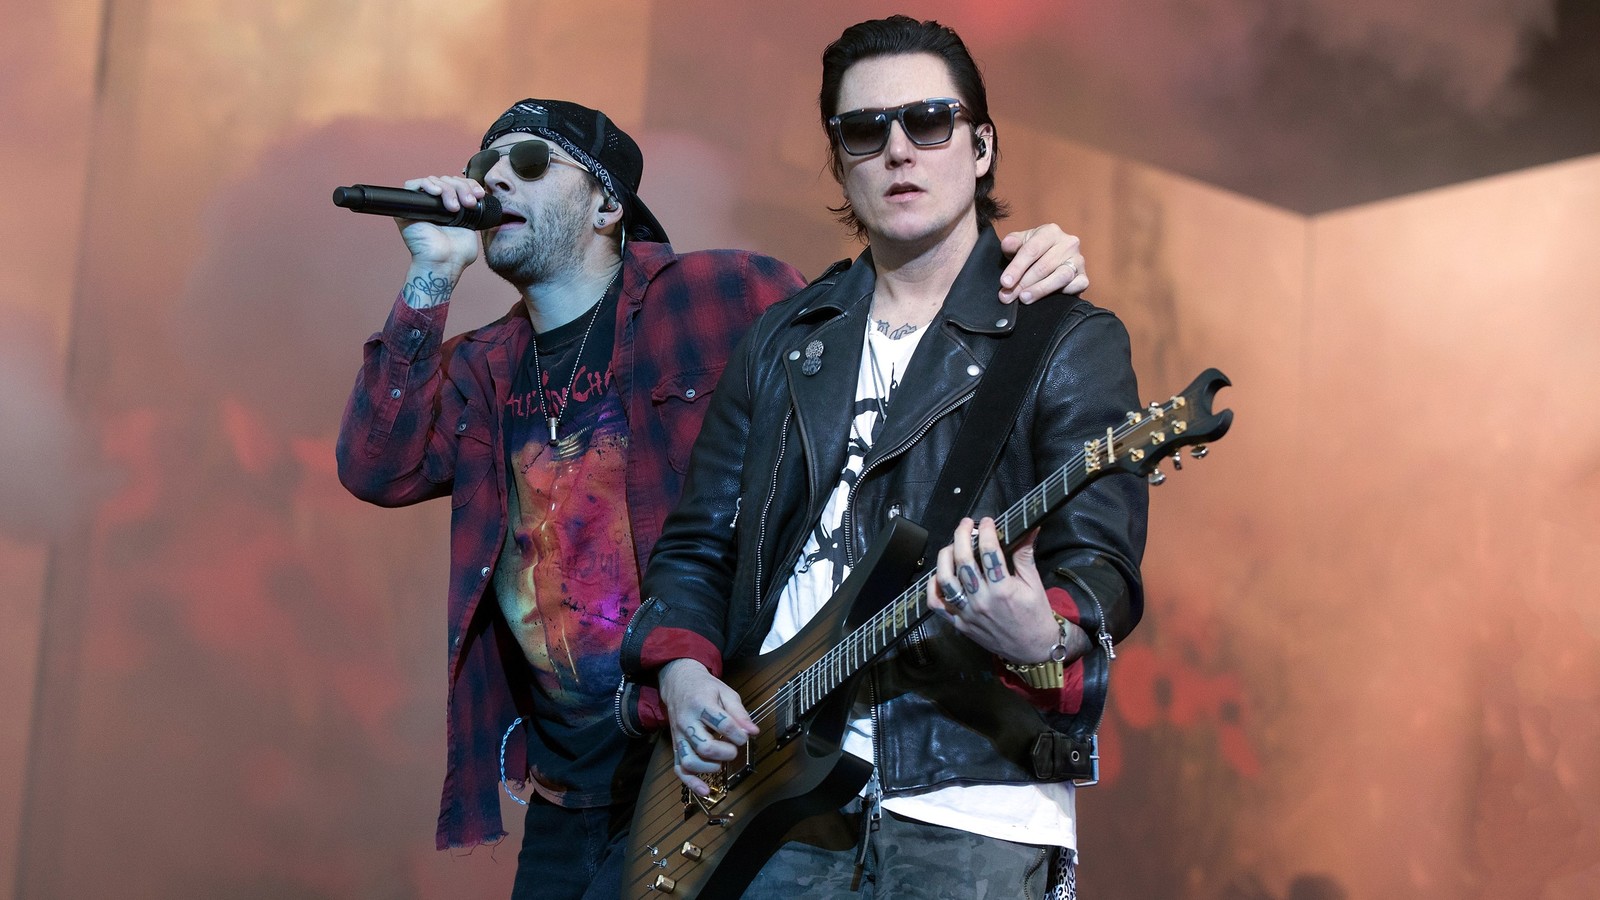 avenged sevenfold north american tour song list